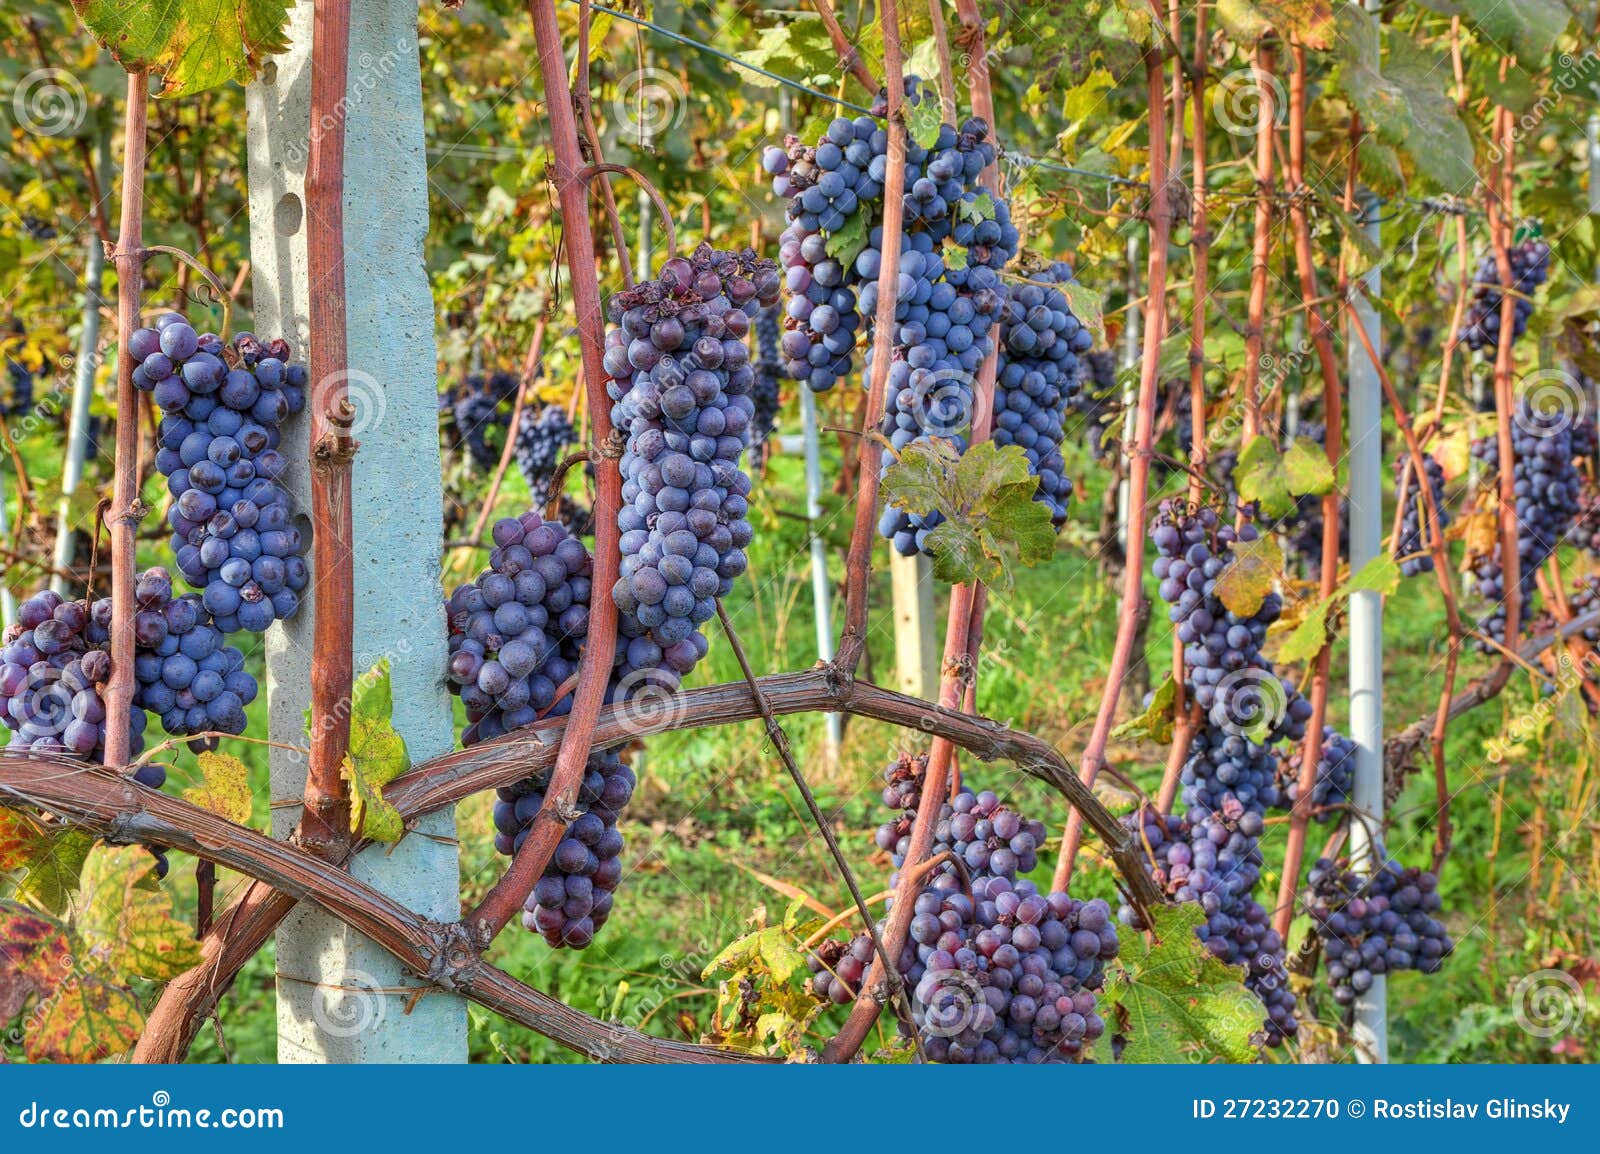 grapes before harvesting. piedmont, italy.